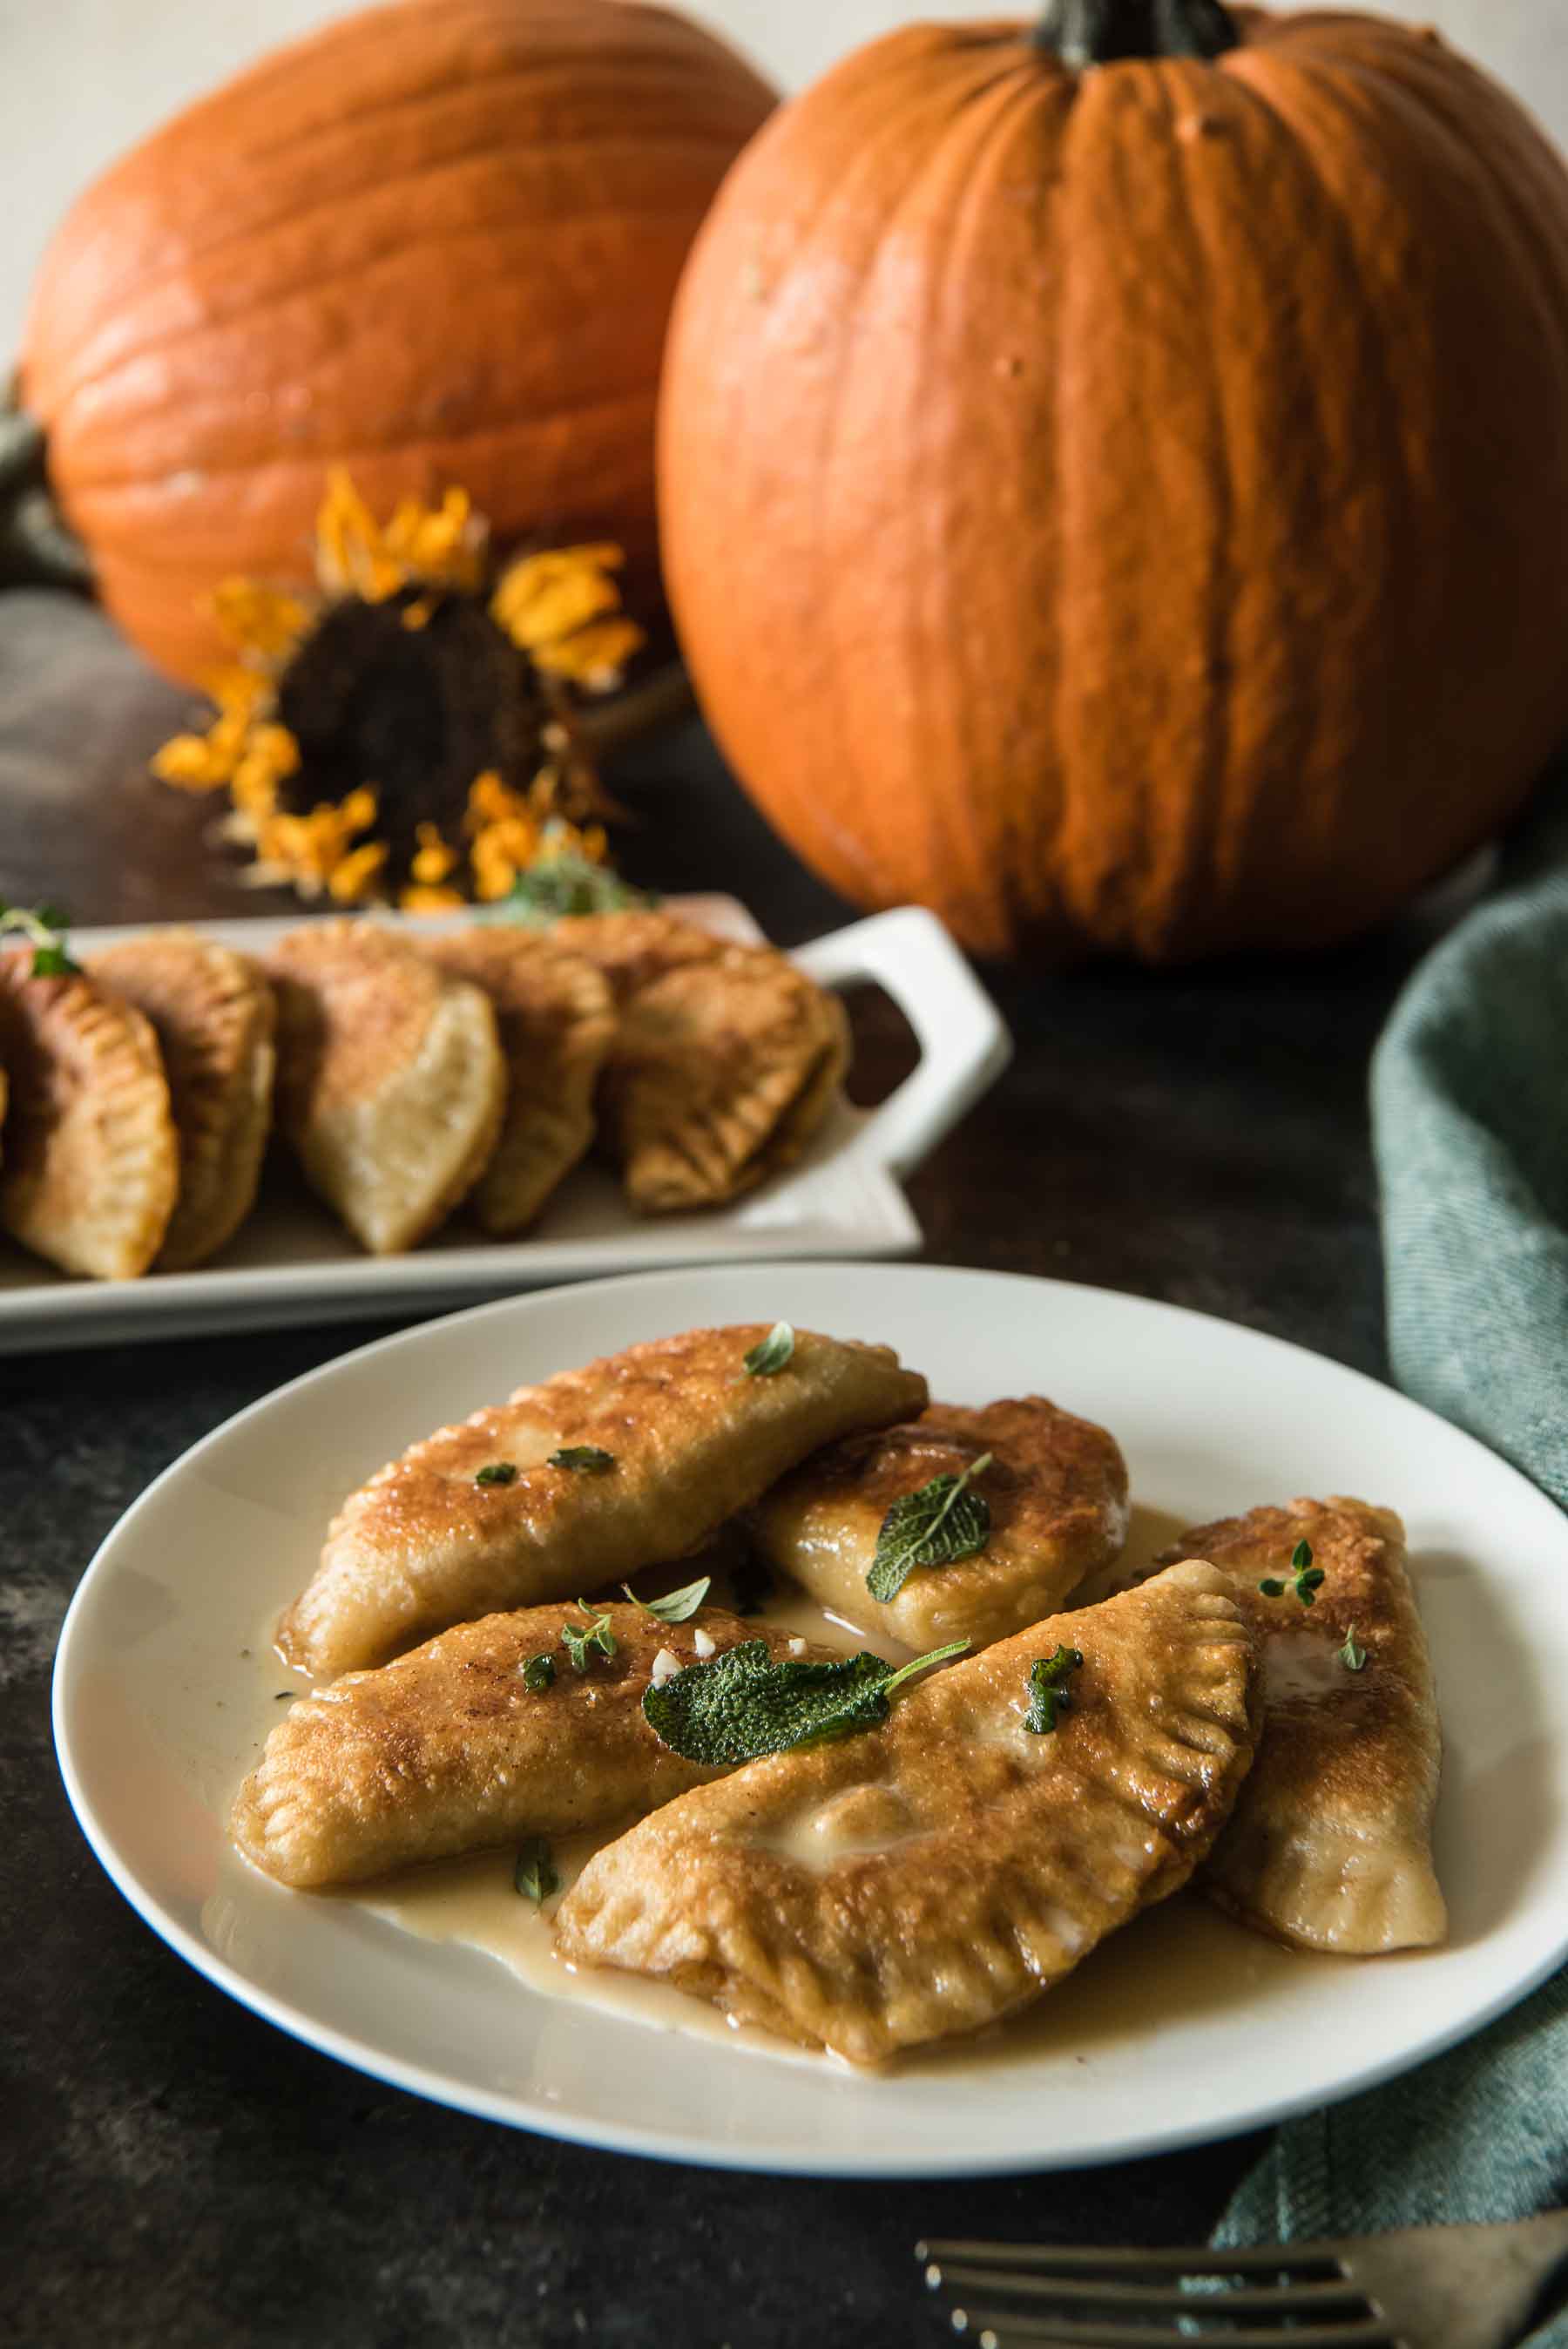 A seasonal take on Nana's Polish dumplings, these Pumpkin Walnut Sage Pierogi are extra delicious when paired with a brown butter cream sauce! 